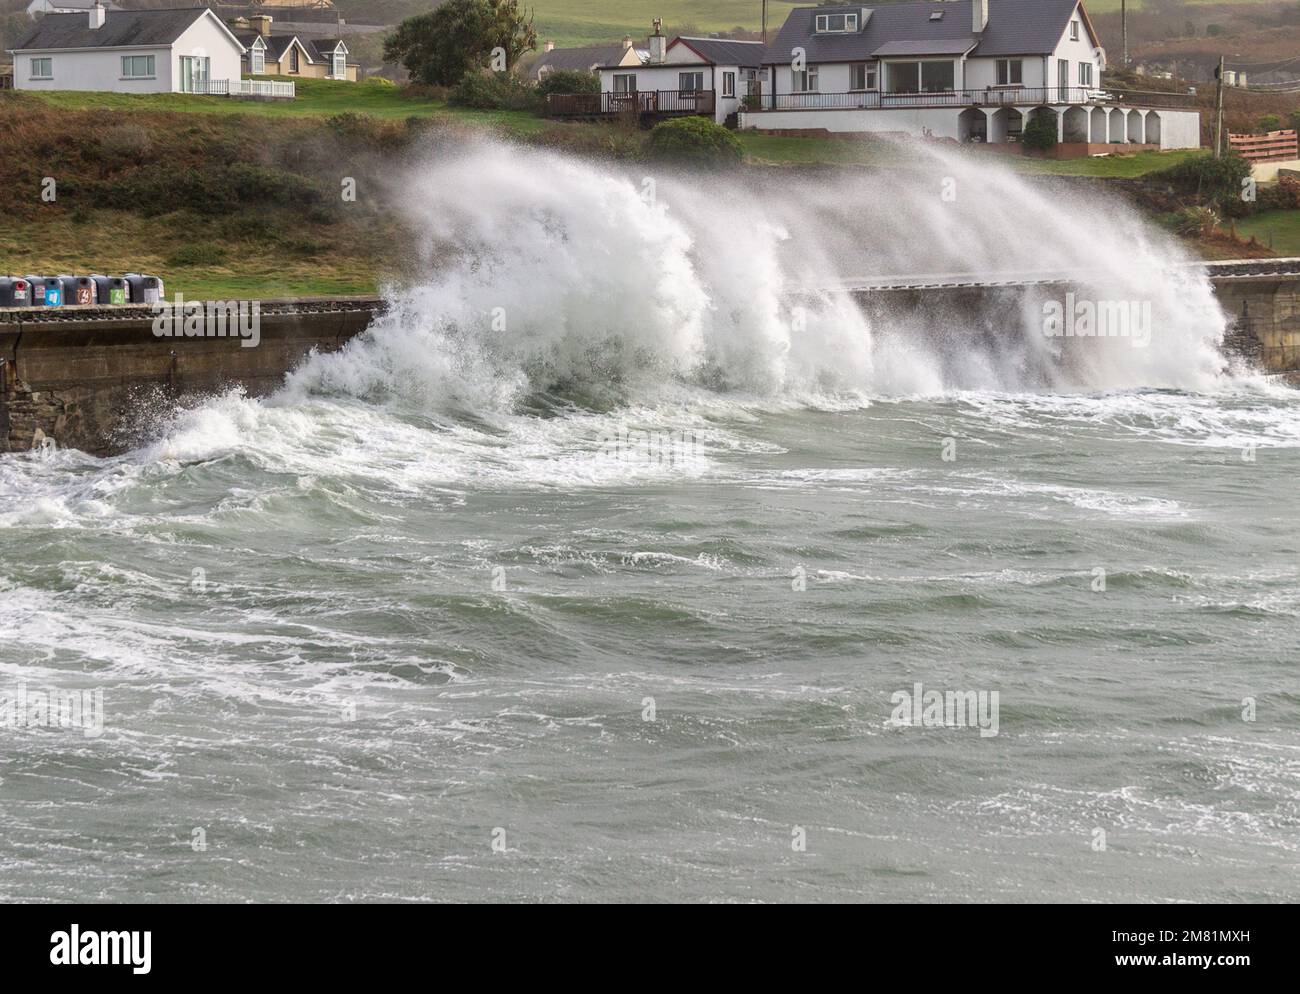 Sea Defence Walls overtopped by Atlantic Winter Storm Waves Stock Photo